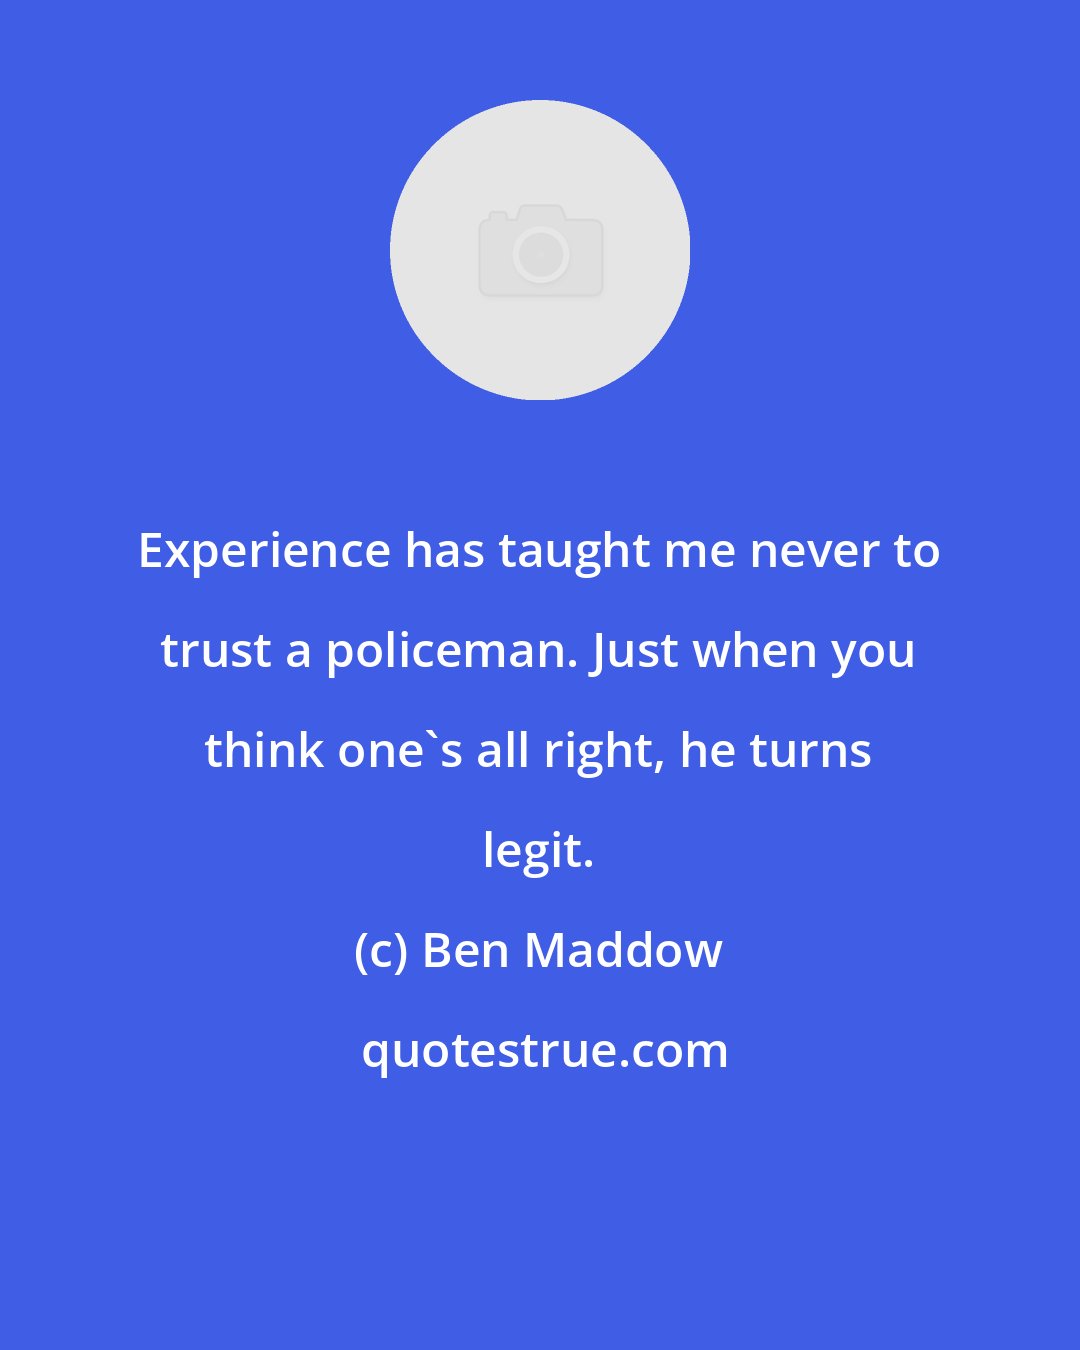 Ben Maddow: Experience has taught me never to trust a policeman. Just when you think one's all right, he turns legit.